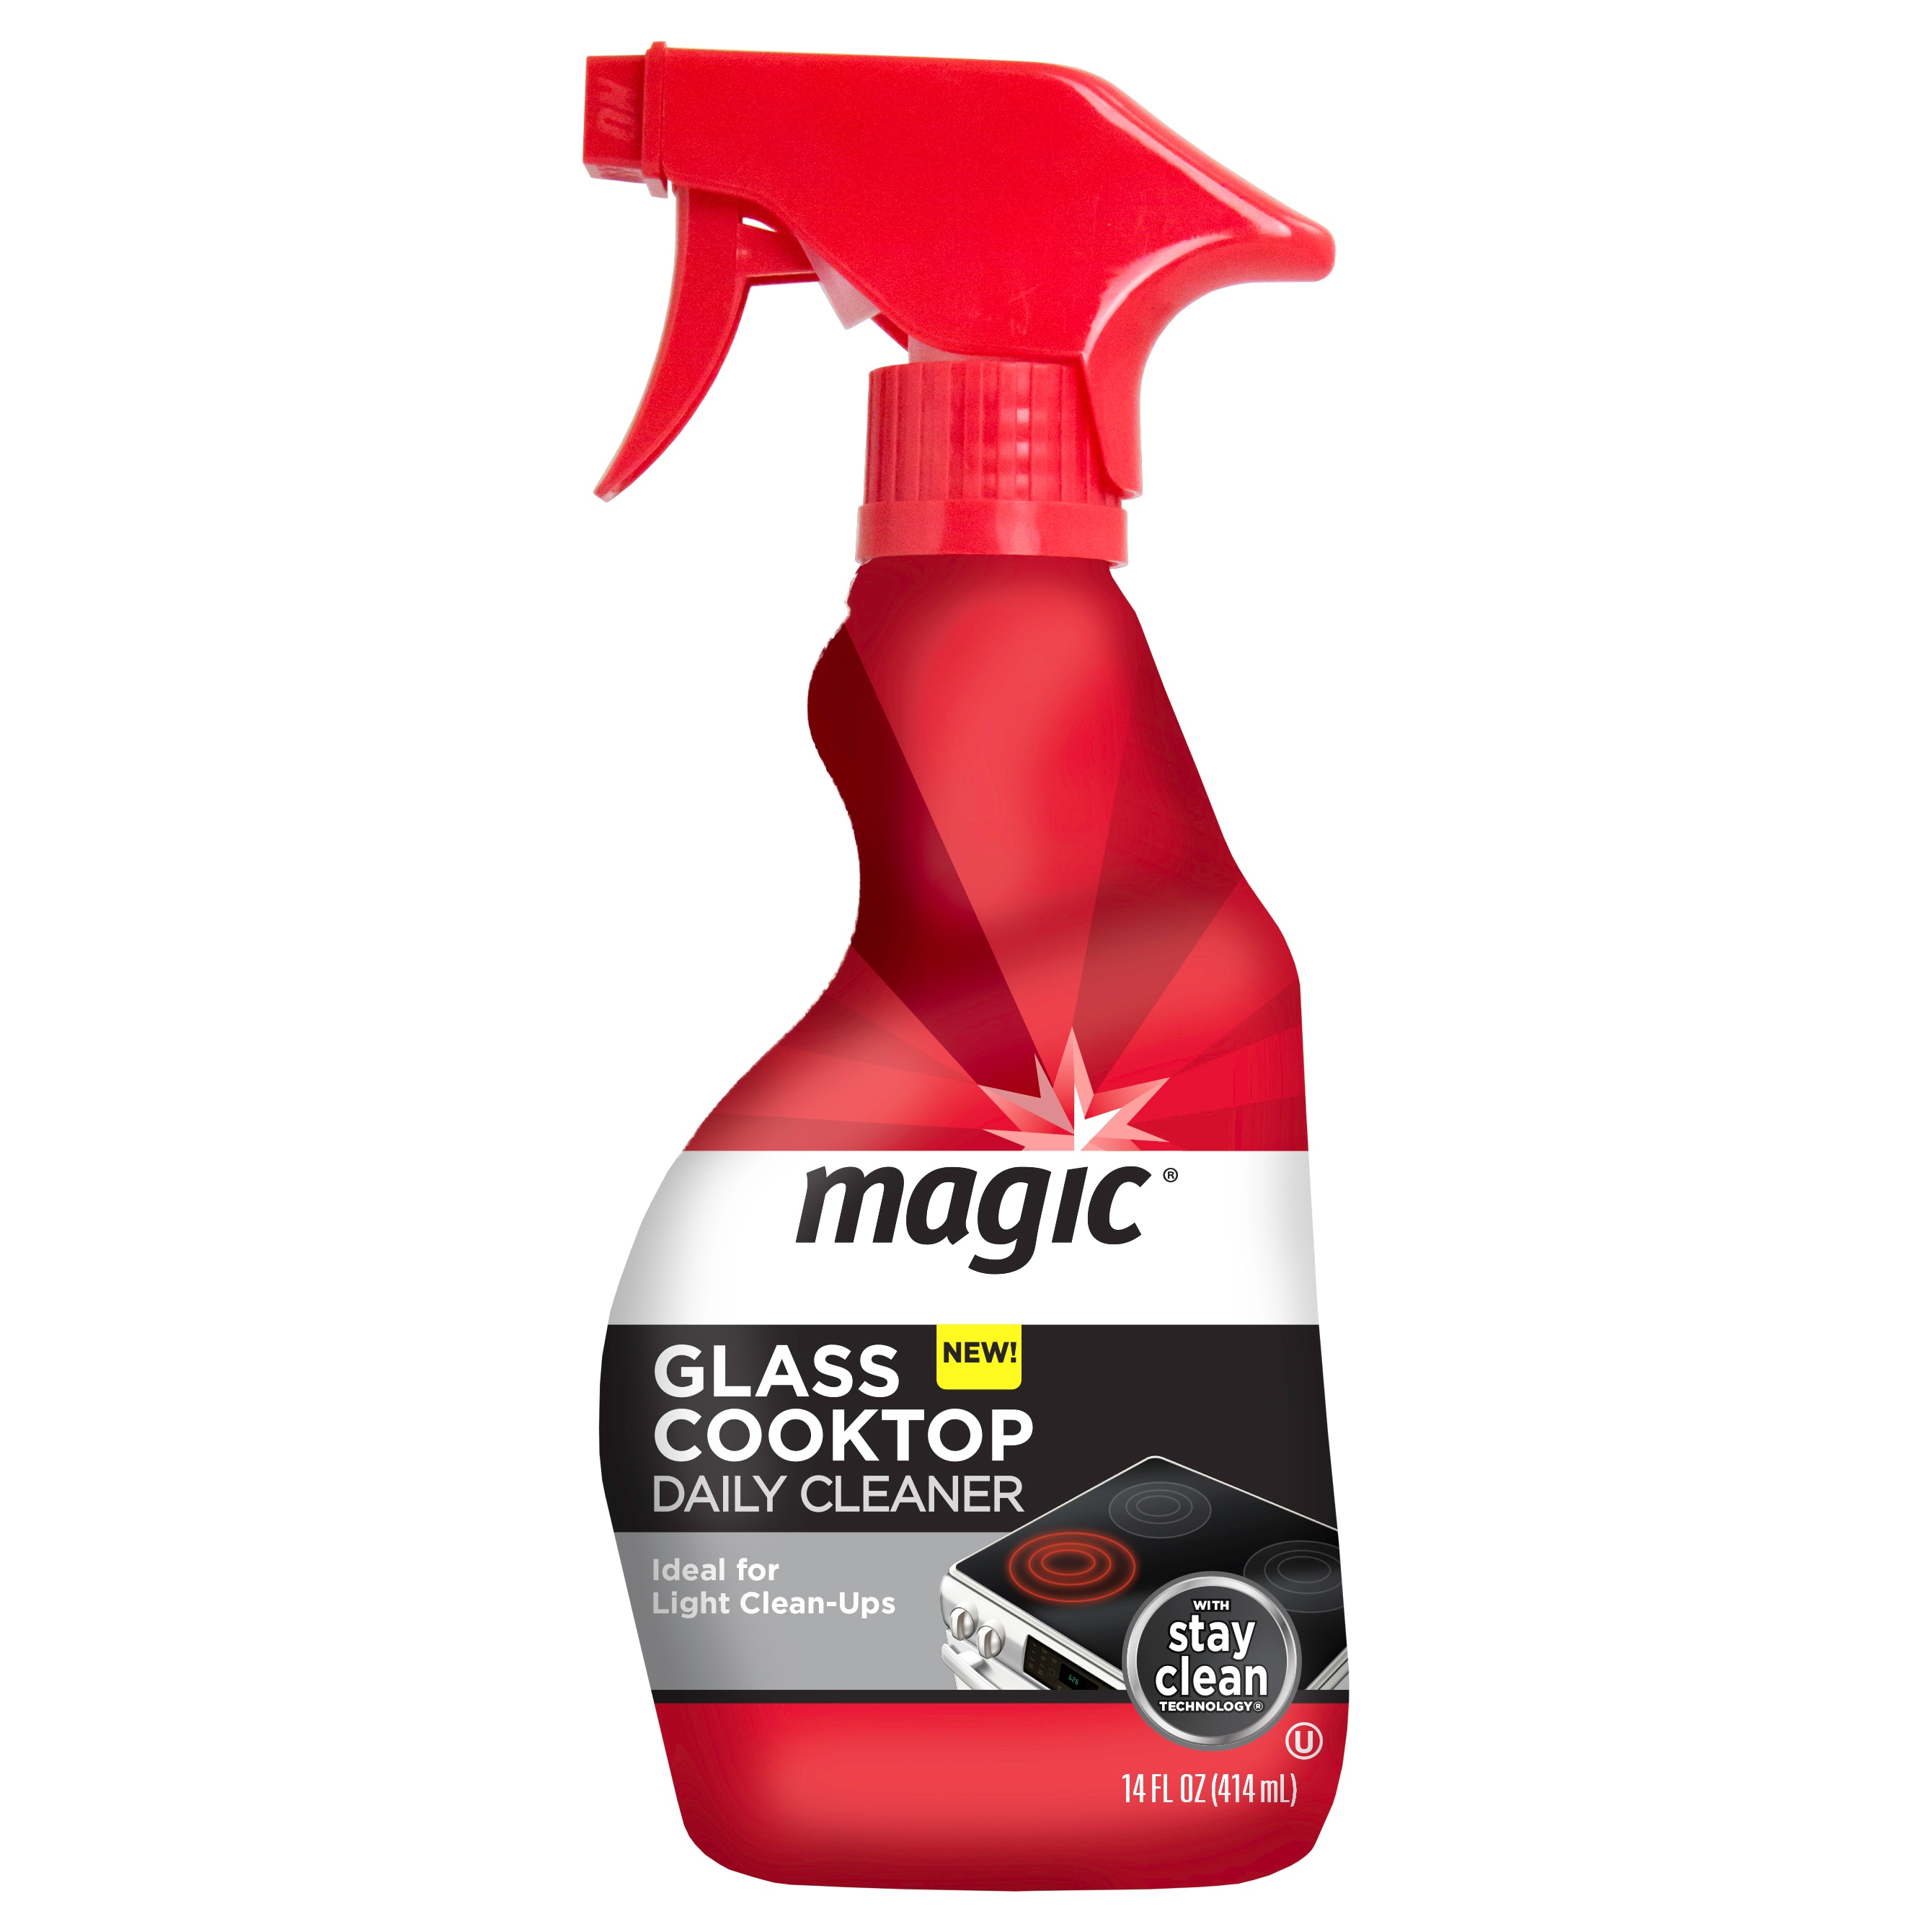 Magic Glass Cooktop Daily Cleaner - 14 fl oz Spray Bottle